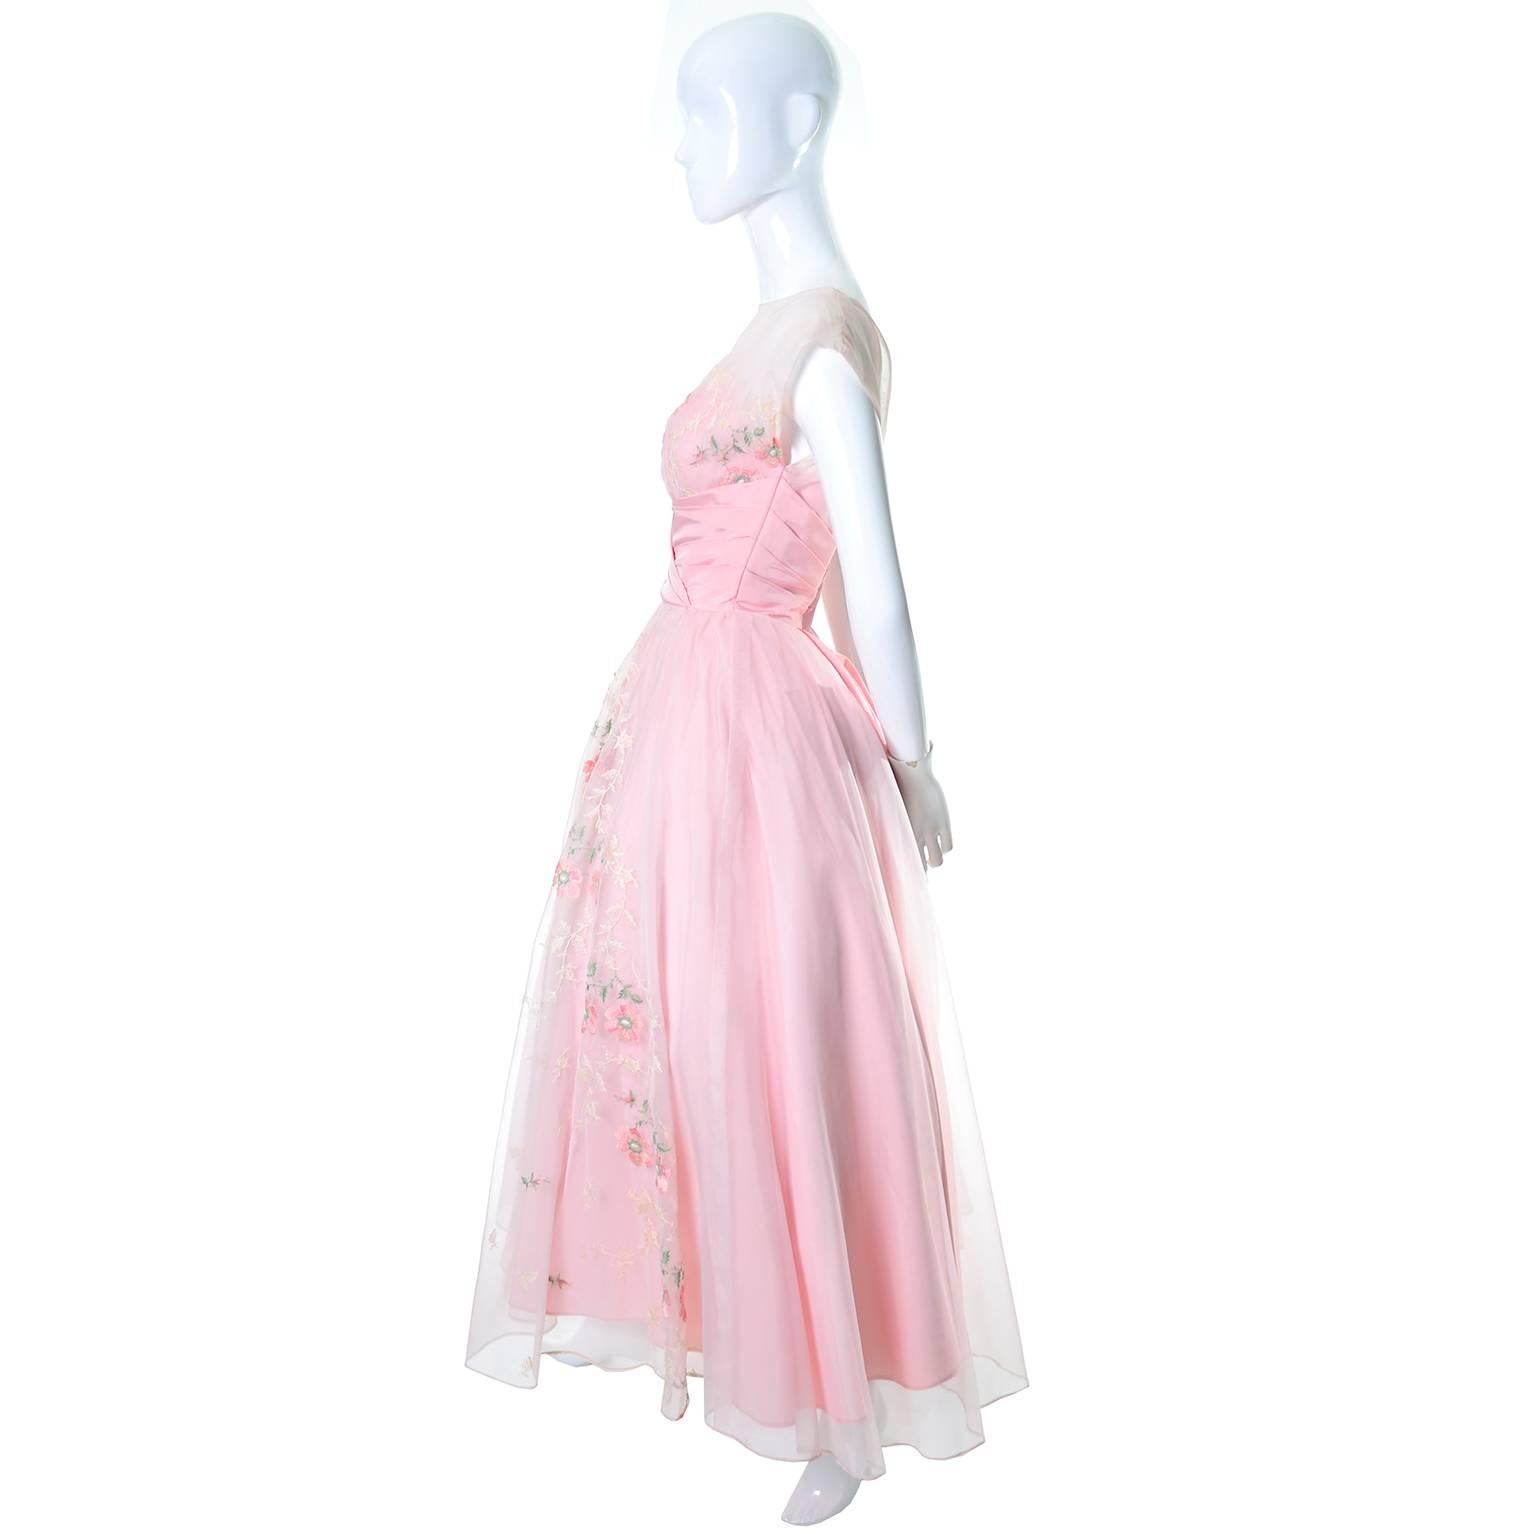 Women's Pink 1950s Vintage Dress Fairytale Dreamy Floral Embroidery Full Skirt 4/6